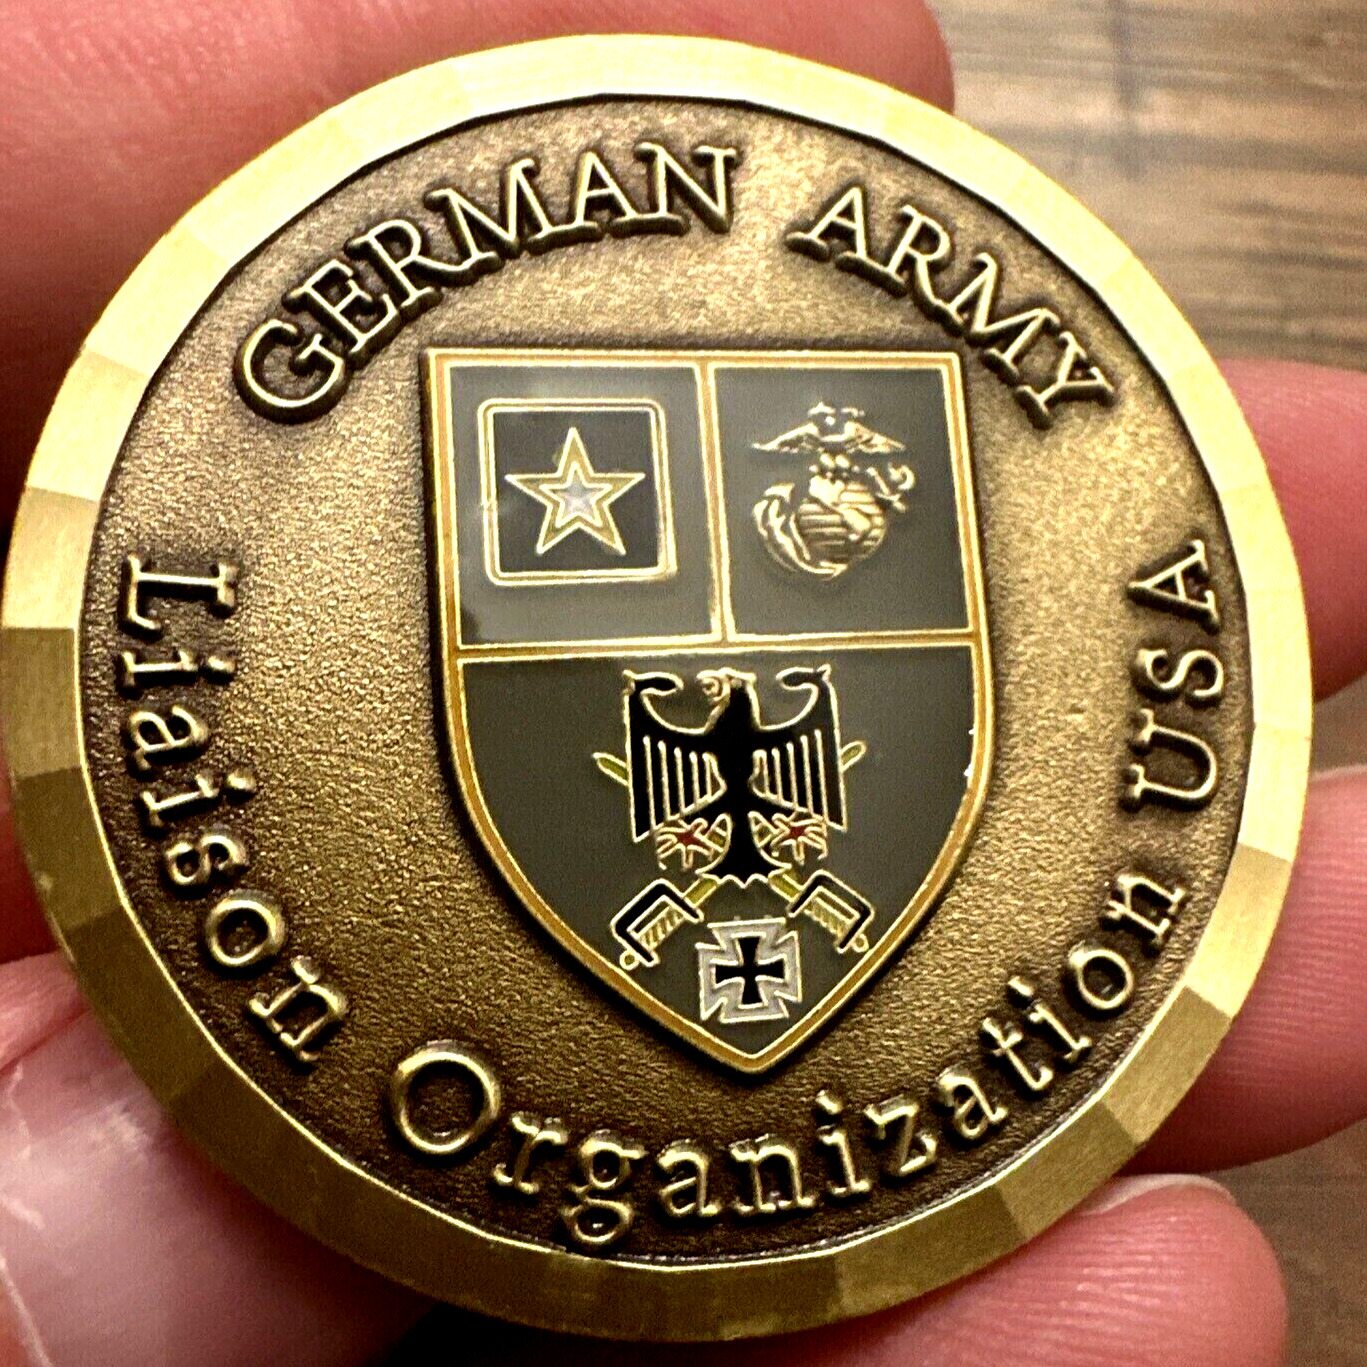 Amazing RARE German Army Challenge Coin US Liaison Organization Limited Mint